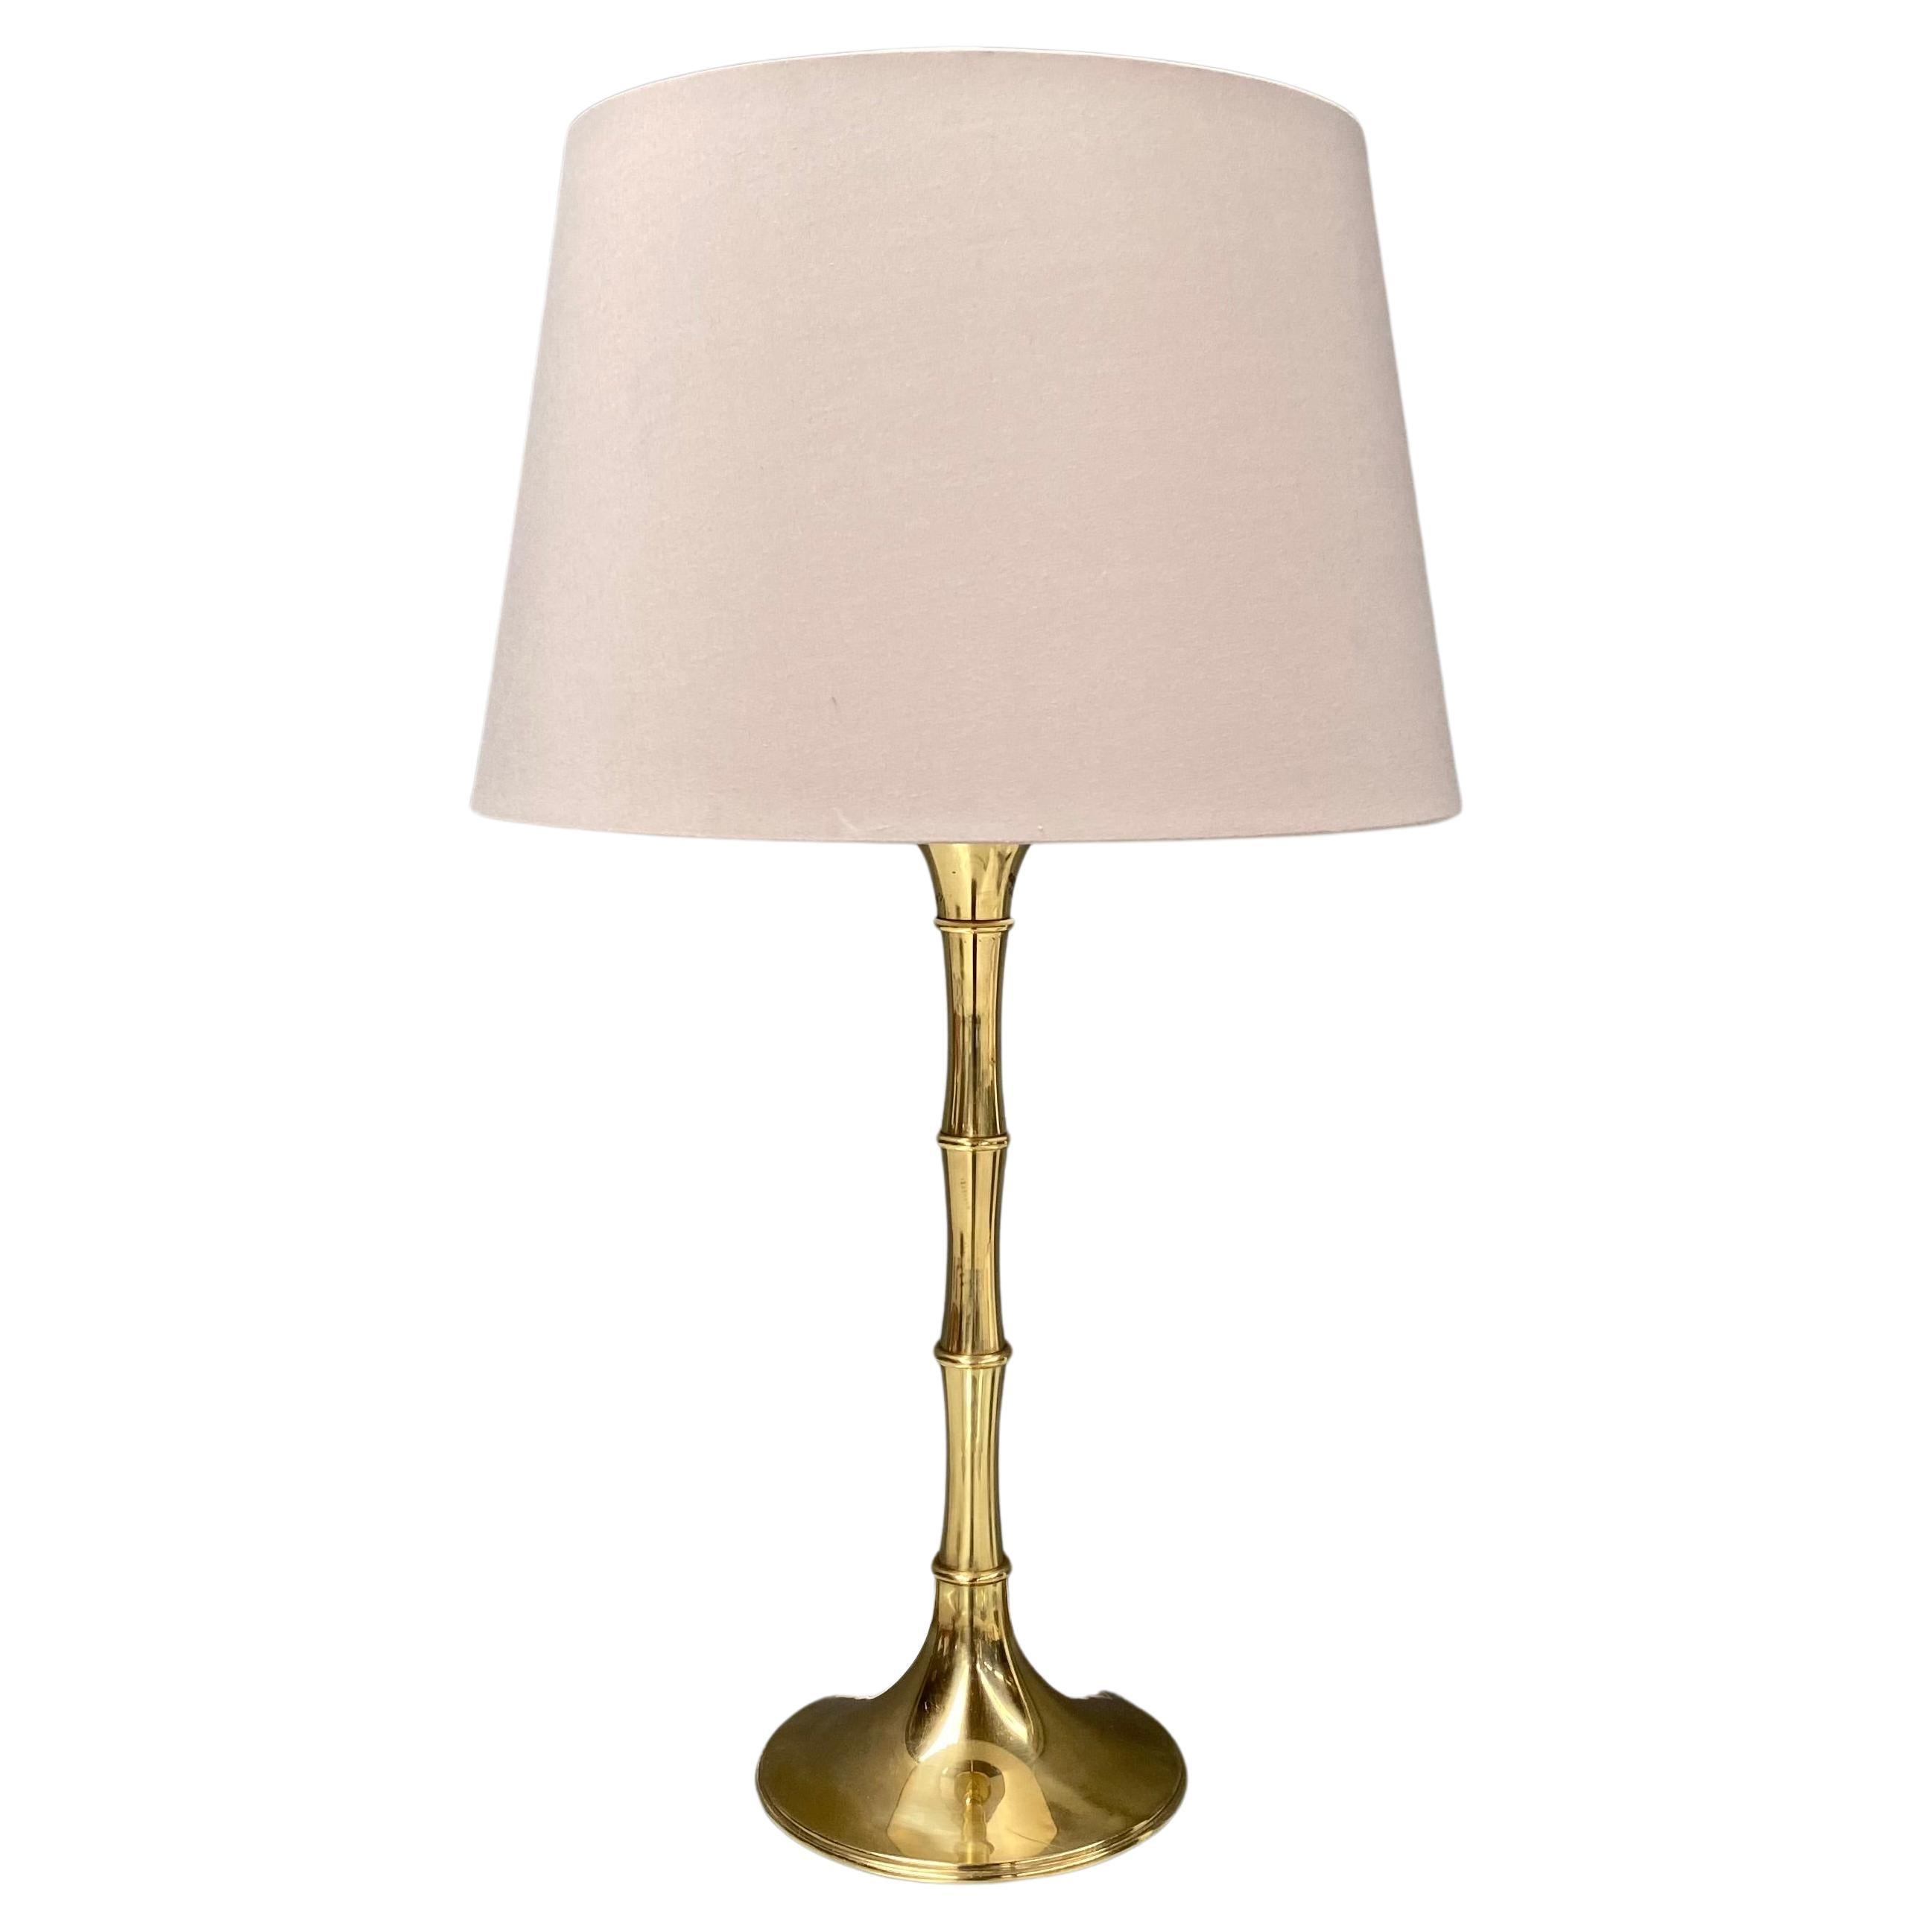 Vintage Bamboo Table Lamp in Brass by Ingo Maurer for M Design, 1960s. For Sale